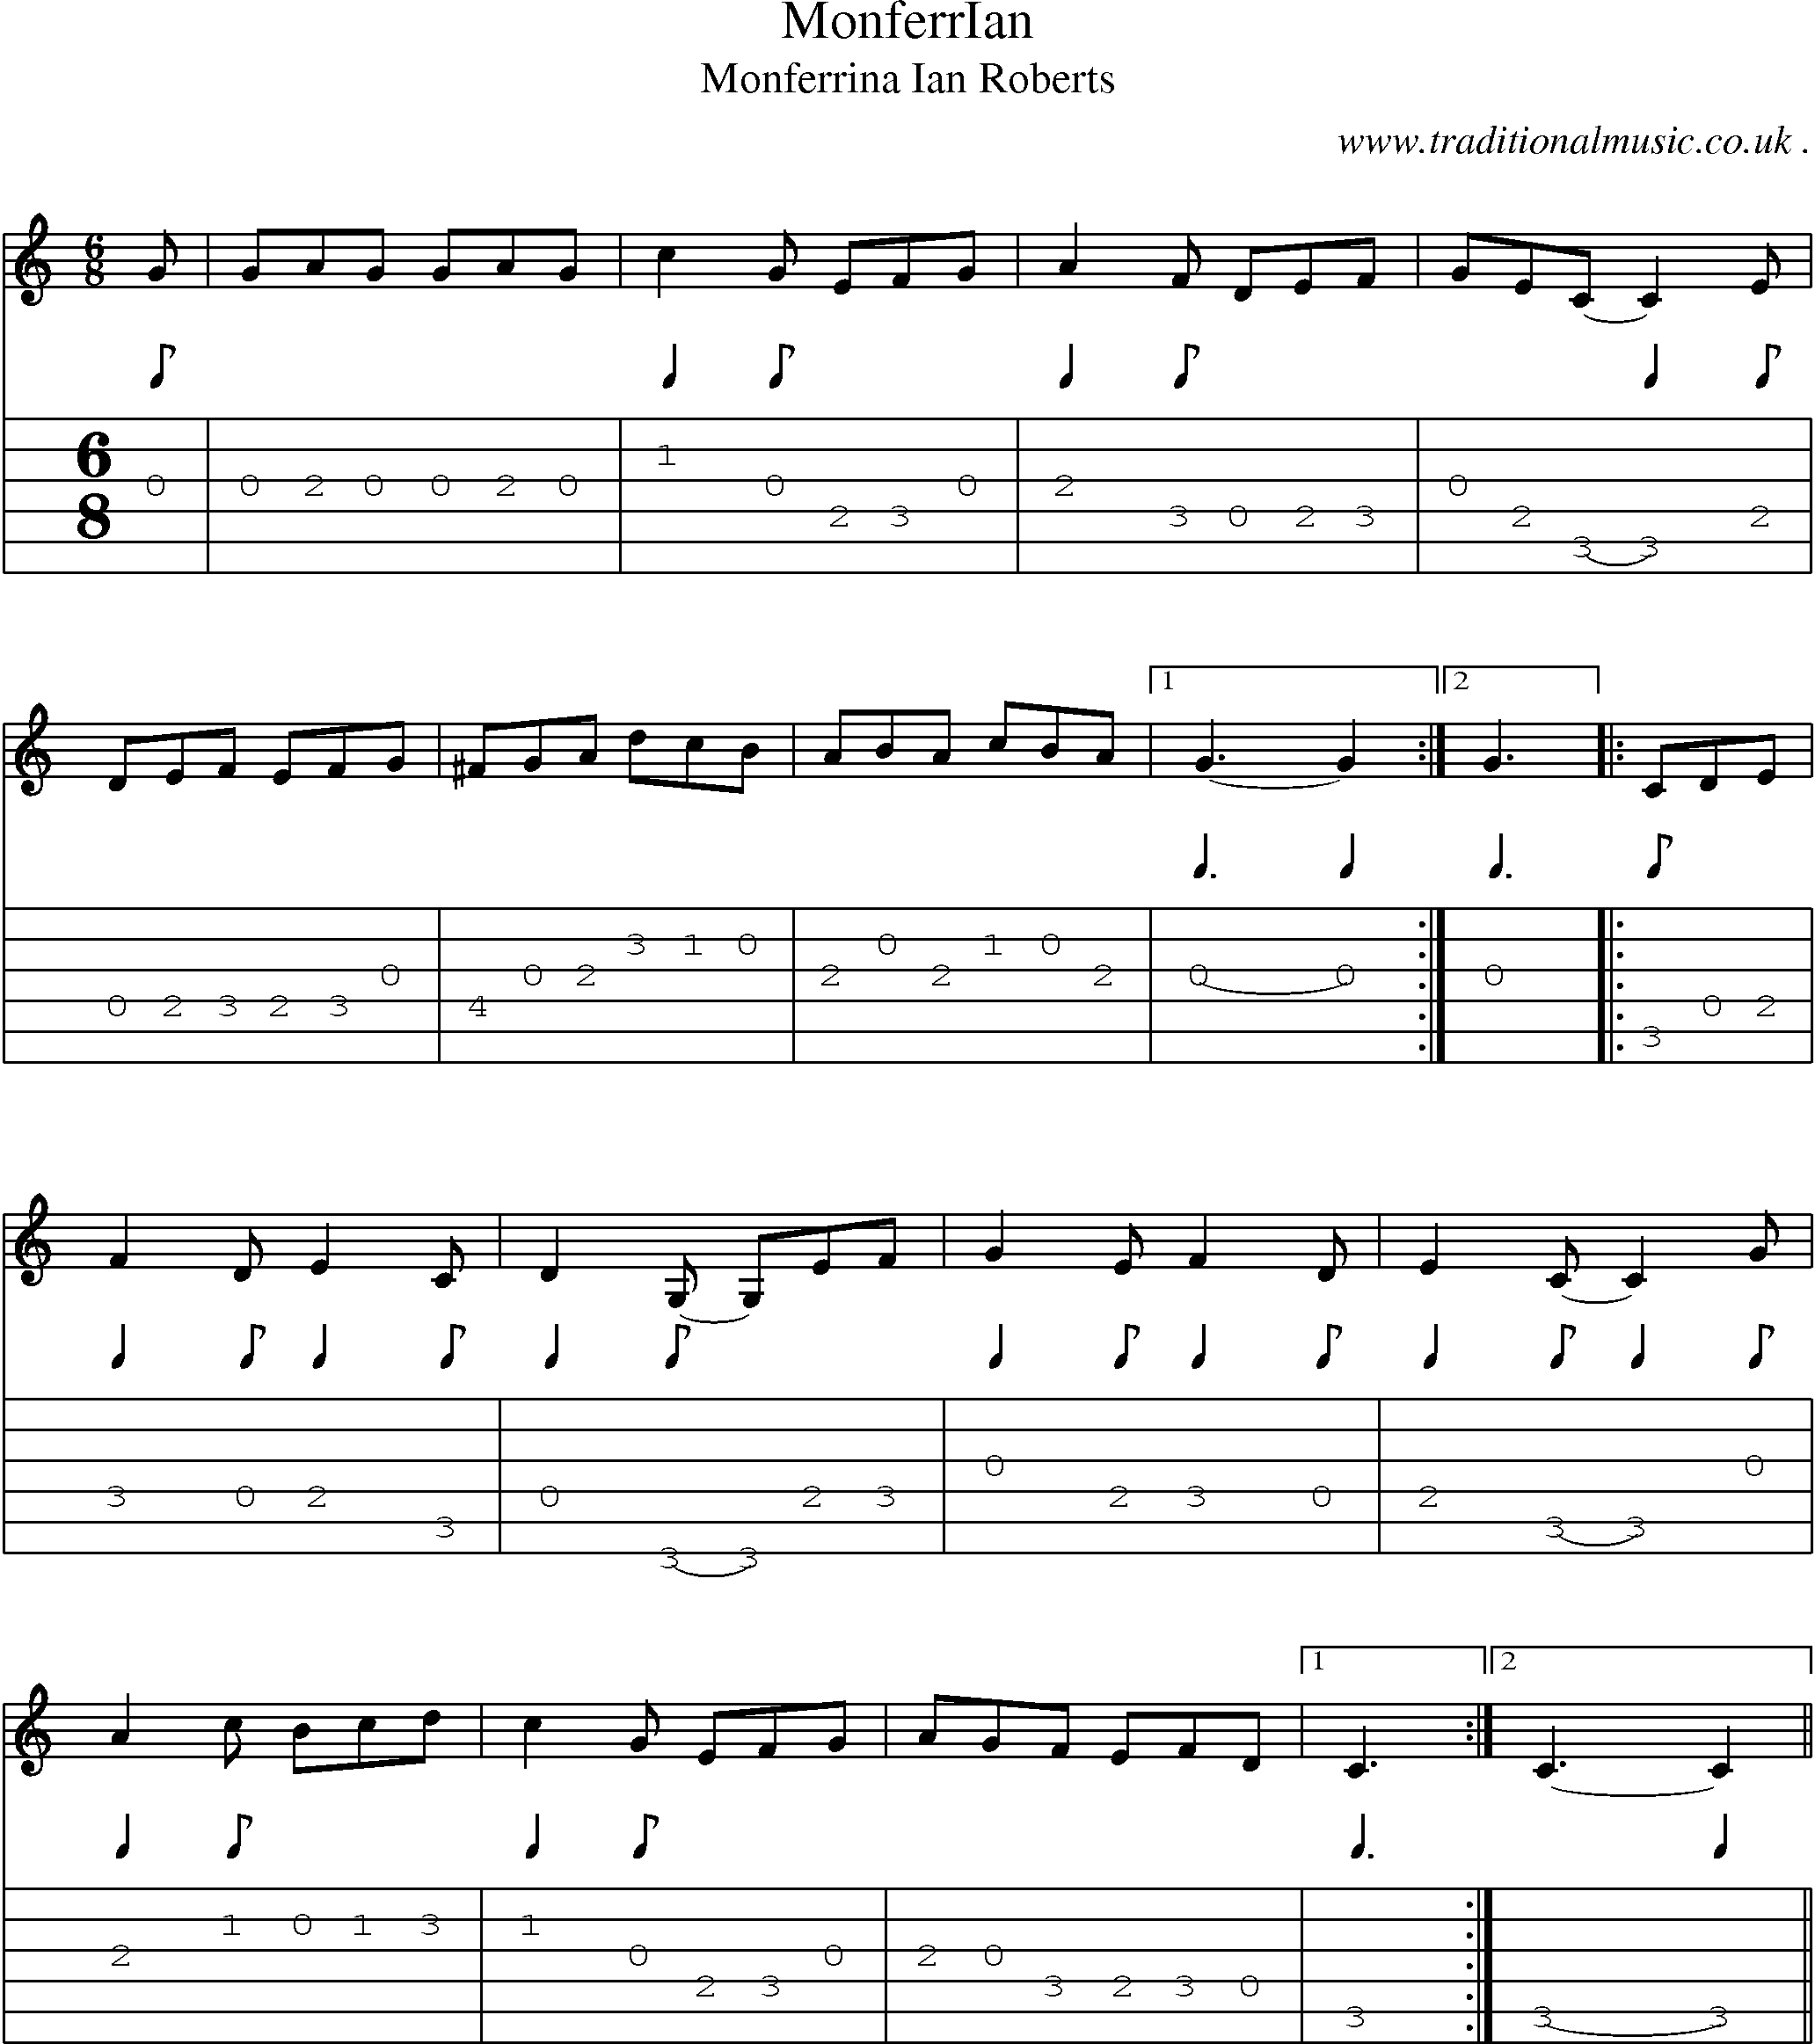 Sheet-Music and Guitar Tabs for Monferrian